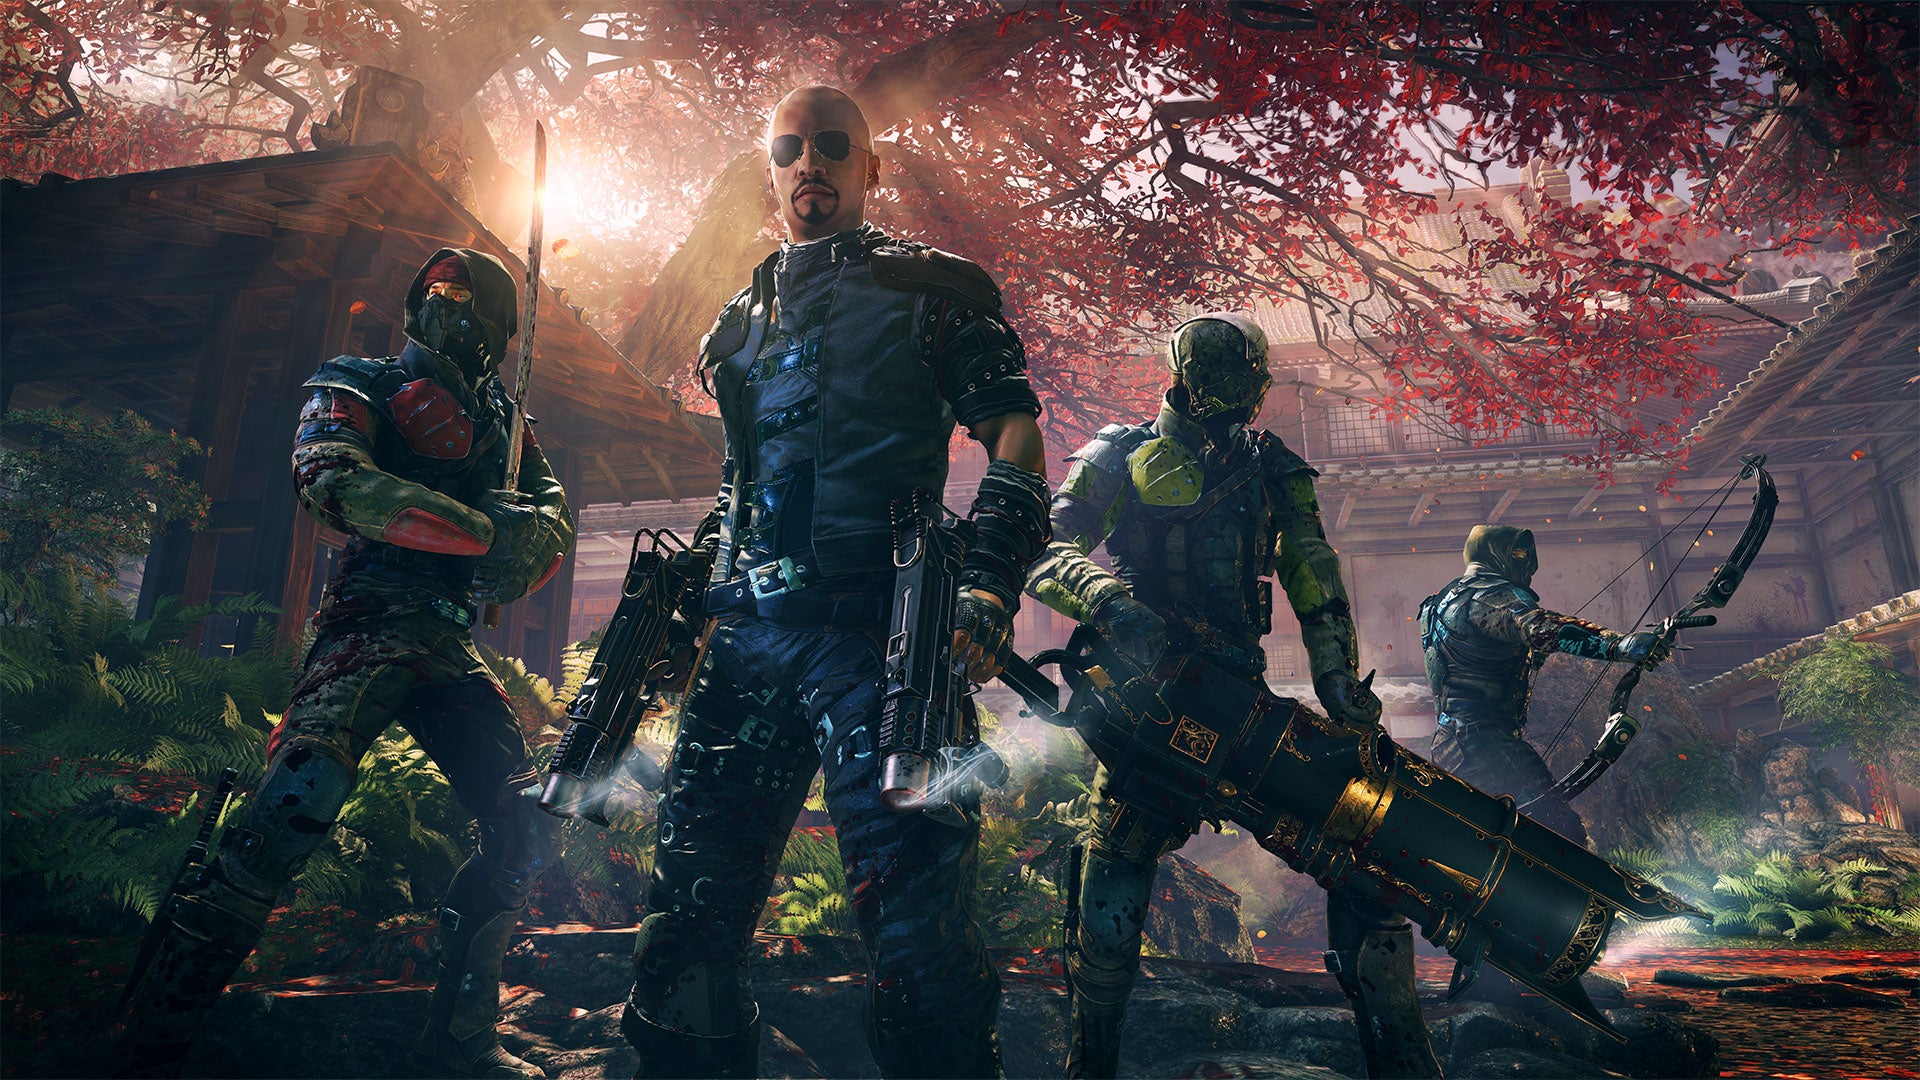 Image for This Shadow Warrior 3 video showcases some of the weapons you'll be wielding